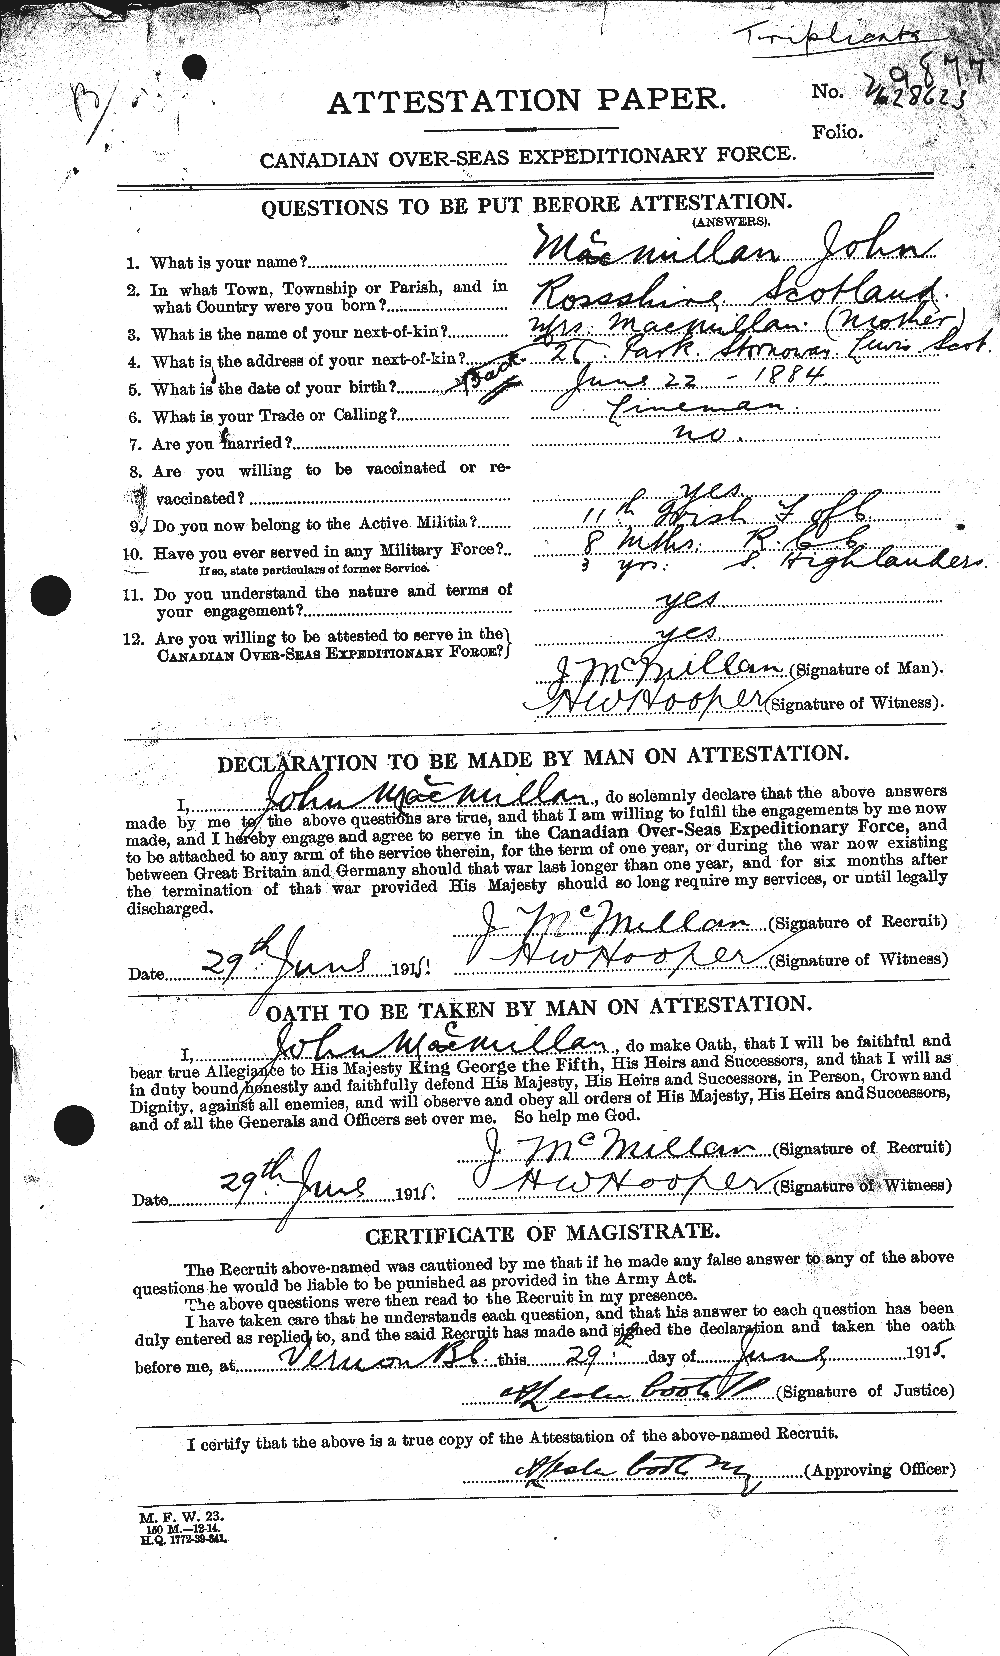 Personnel Records of the First World War - CEF 543971a